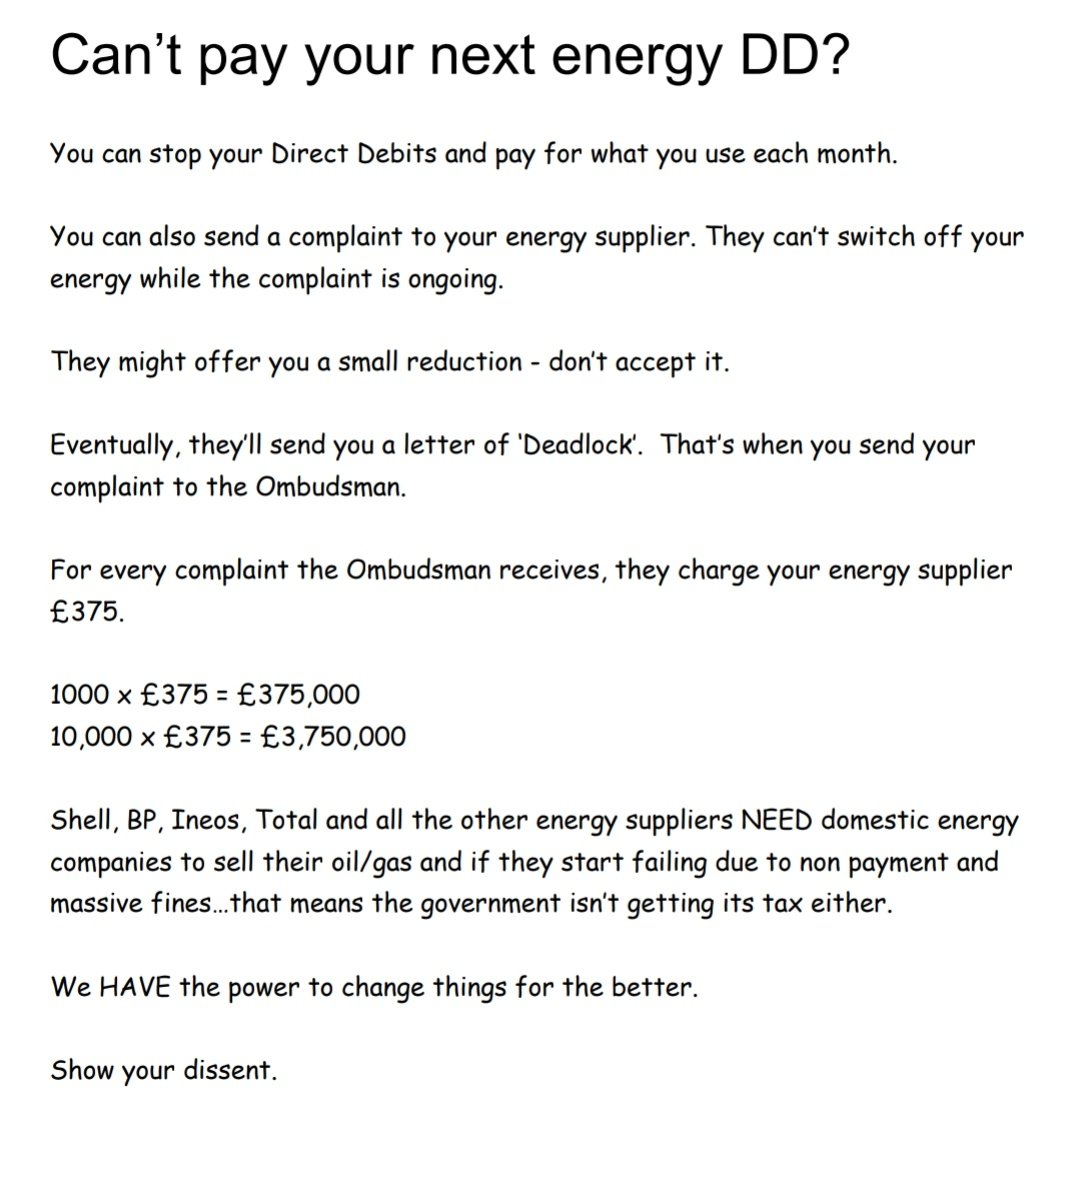 Thank you to the anonymous energy sector whistle-blower for providing this information.